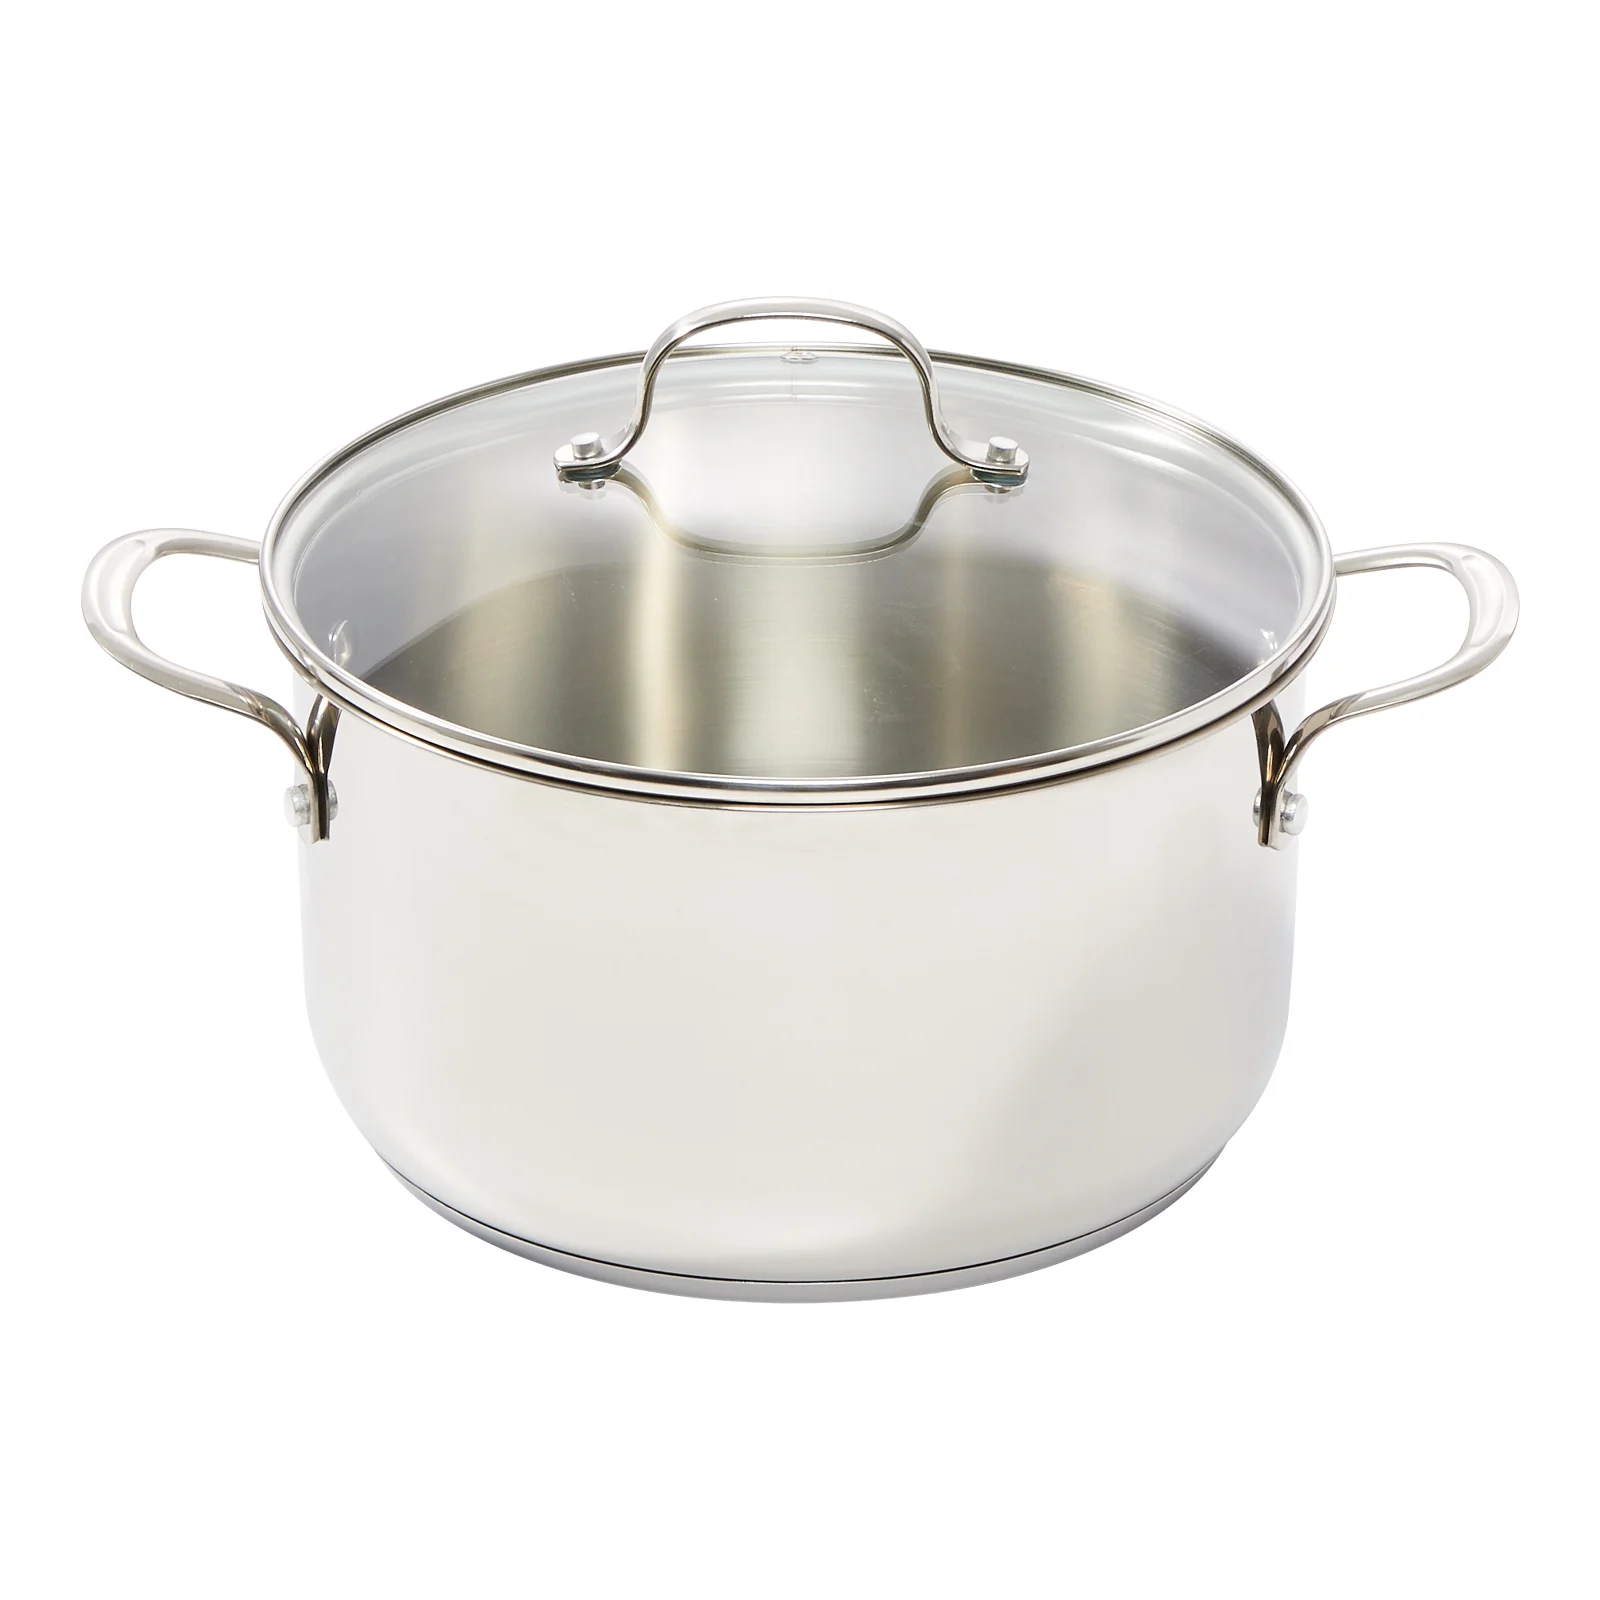 A stainless steel pot 